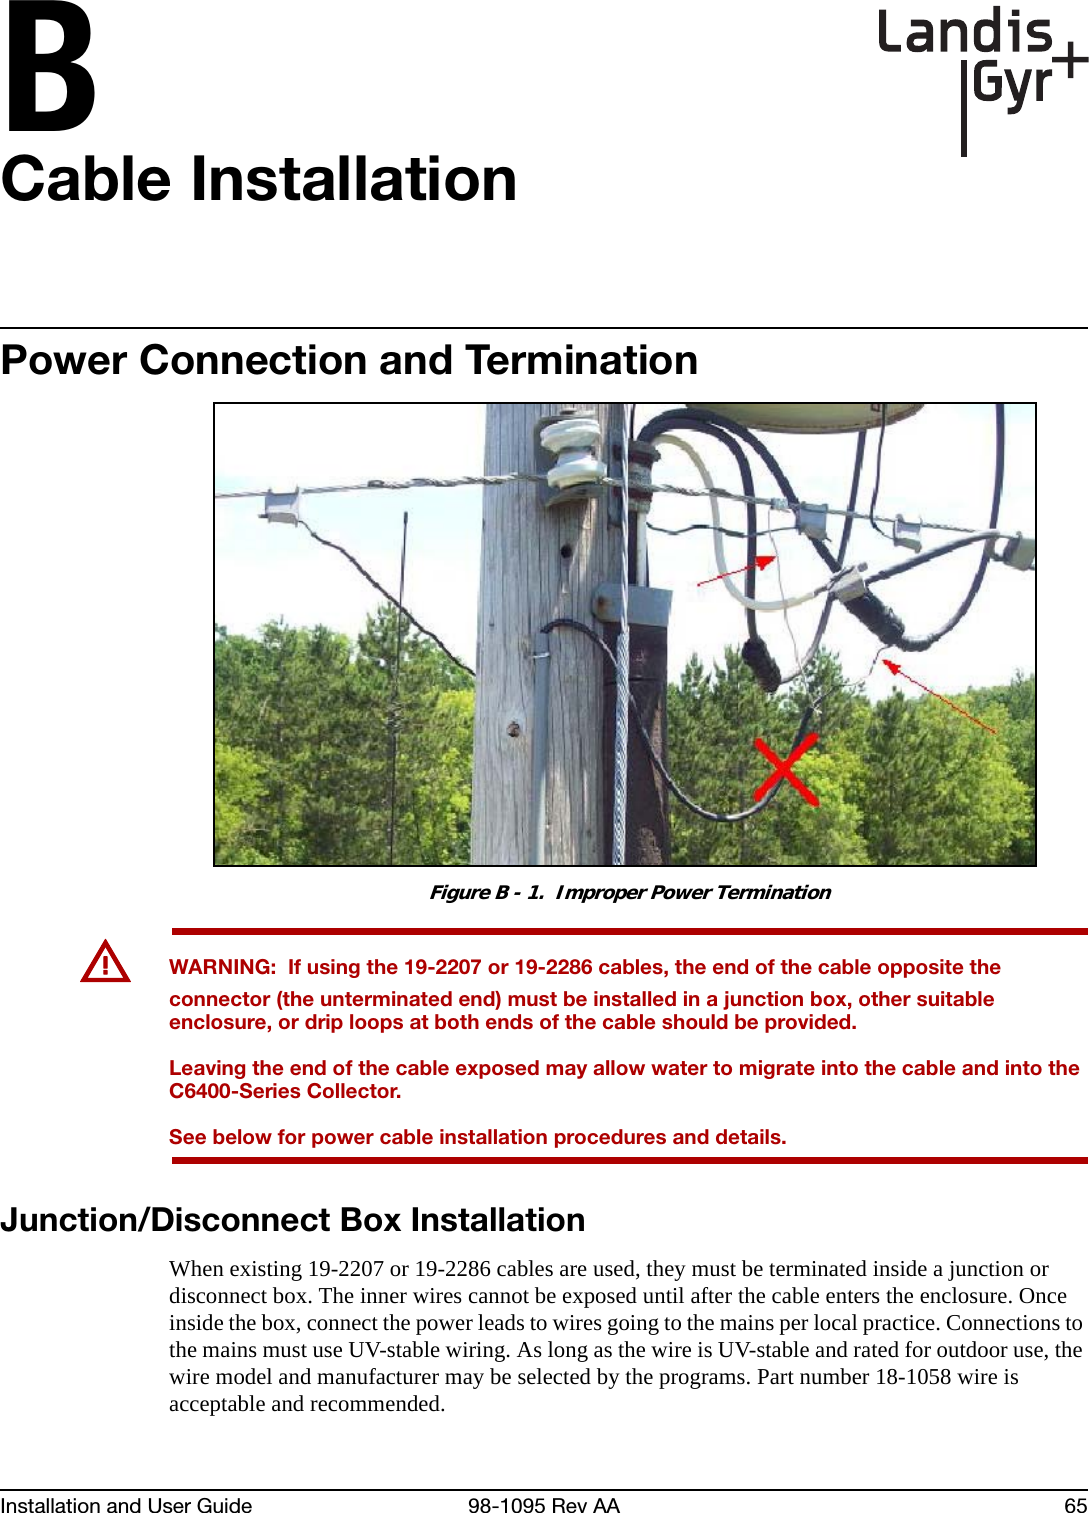 BInstallation and User Guide 98-1095 Rev AA 65Cable InstallationPower Connection and TerminationFigure B - 1.  Improper Power TerminationUWARNING:  If using the 19-2207 or 19-2286 cables, the end of the cable opposite the connector (the unterminated end) must be installed in a junction box, other suitable enclosure, or drip loops at both ends of the cable should be provided. Leaving the end of the cable exposed may allow water to migrate into the cable and into the C6400-Series Collector.See below for power cable installation procedures and details.Junction/Disconnect Box InstallationWhen existing 19-2207 or 19-2286 cables are used, they must be terminated inside a junction or disconnect box. The inner wires cannot be exposed until after the cable enters the enclosure. Once inside the box, connect the power leads to wires going to the mains per local practice. Connections to the mains must use UV-stable wiring. As long as the wire is UV-stable and rated for outdoor use, the wire model and manufacturer may be selected by the programs. Part number 18-1058 wire is acceptable and recommended.